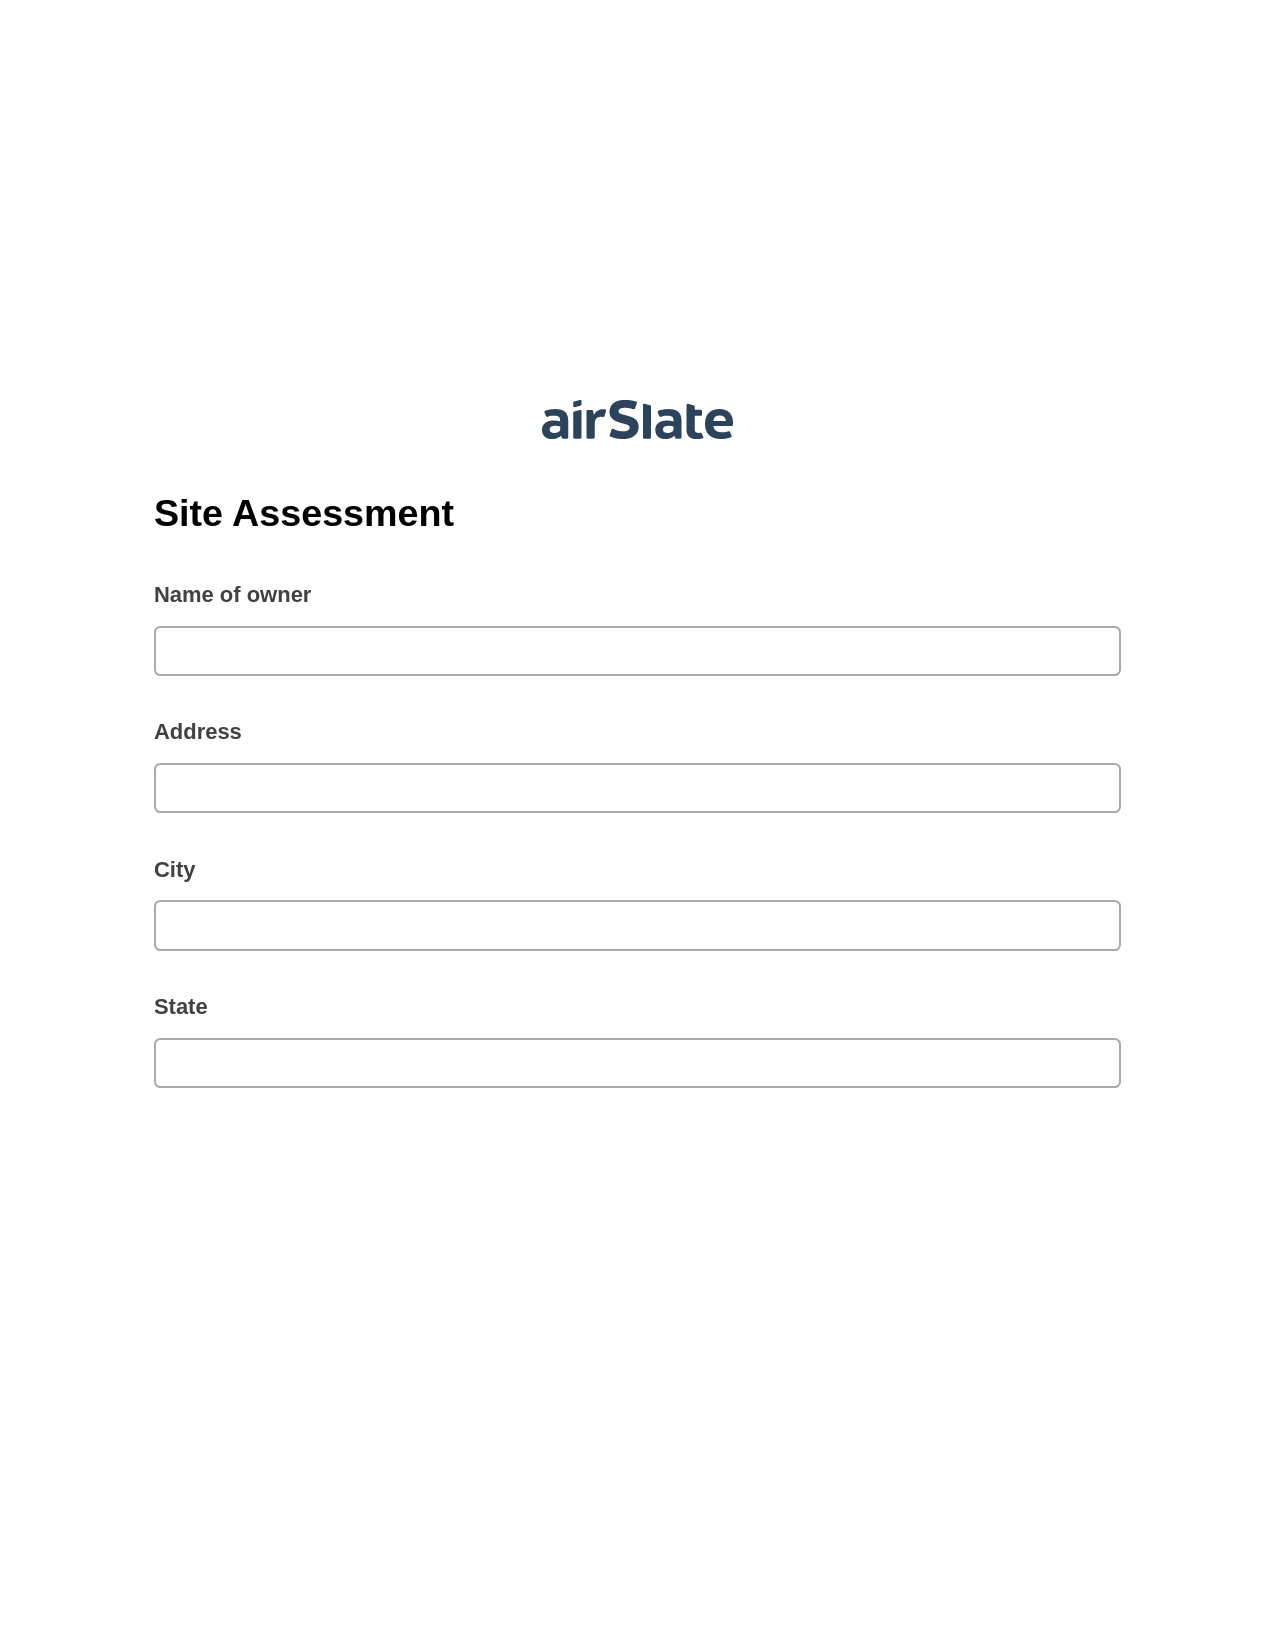 Multirole Site Assessment Pre-fill from CSV File Dropdown Options Bot, Reminder Bot, Archive to SharePoint Folder Bot